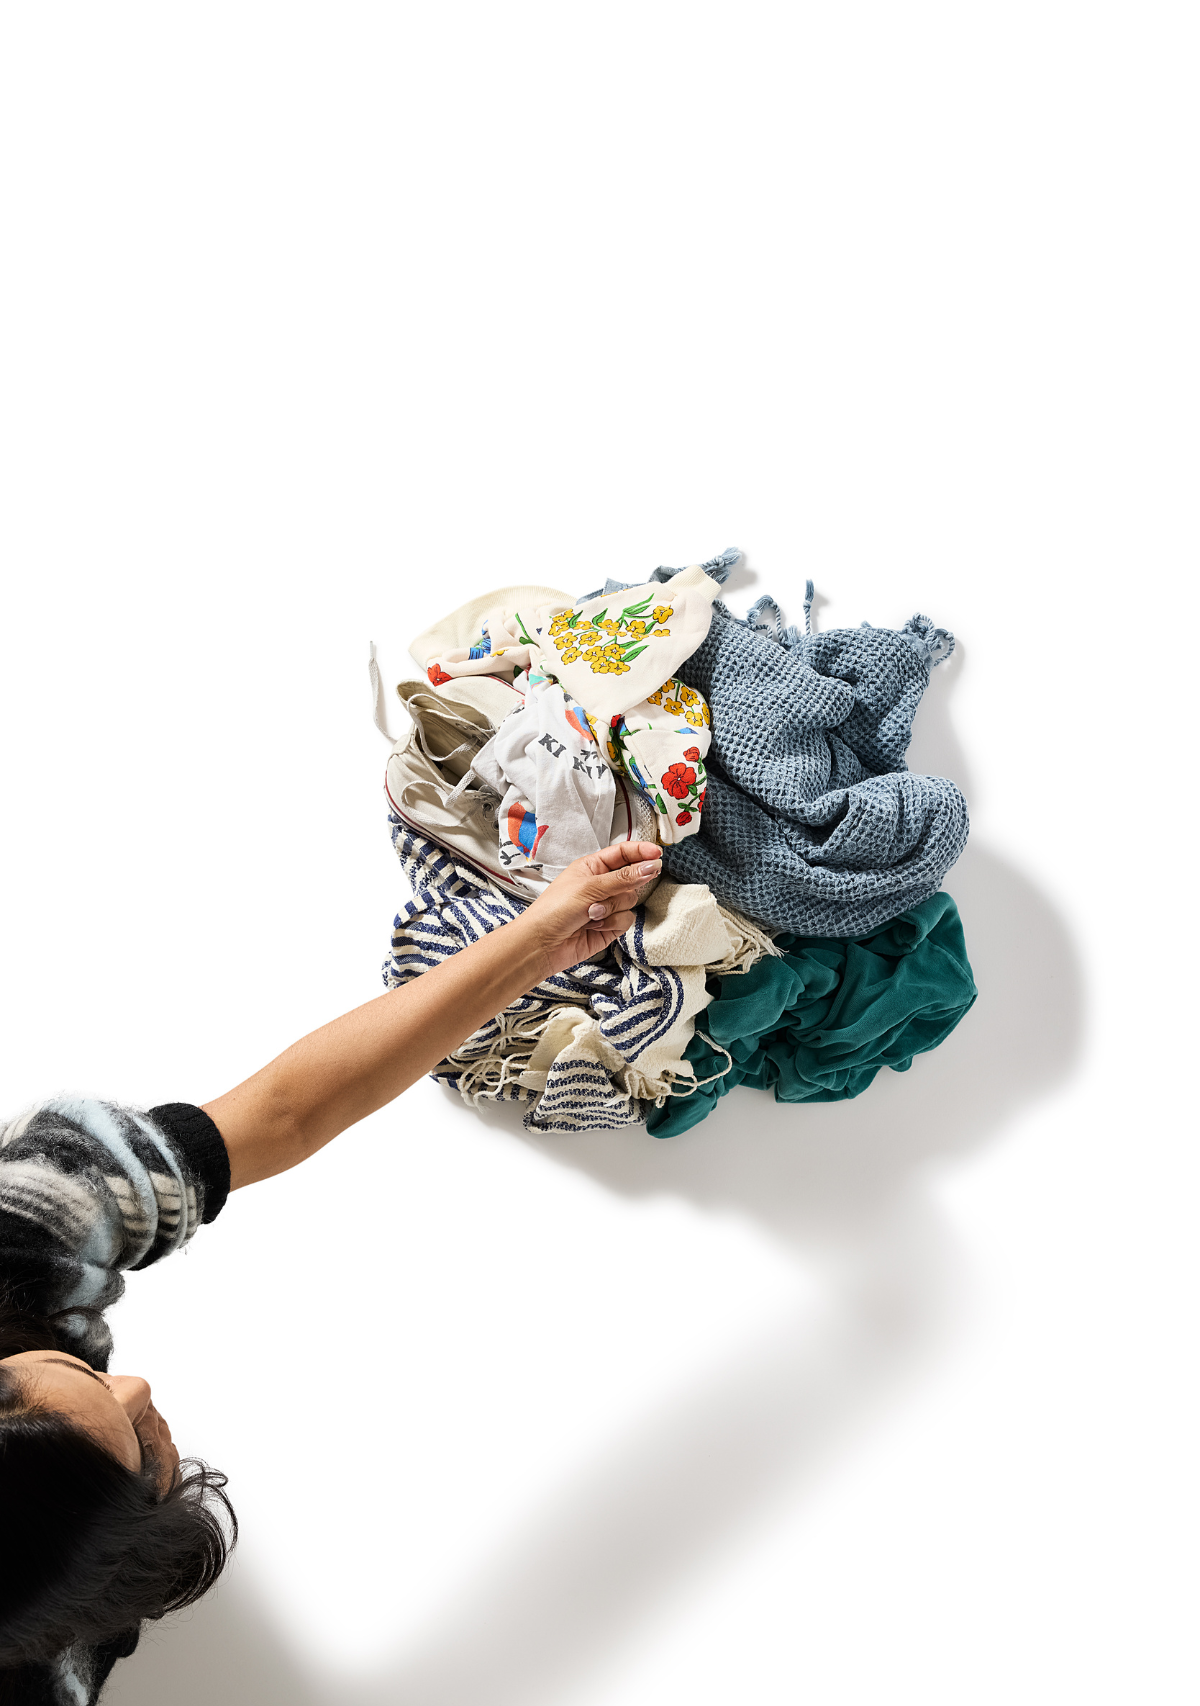 The Poplinen Take Back Bag is here to start a circular revolution and end fashion waste. Here’s what to do: order a Take Back Bag, clean out your closet, and send in your filled bag. You'll earn $20 in Closet Cash credit 